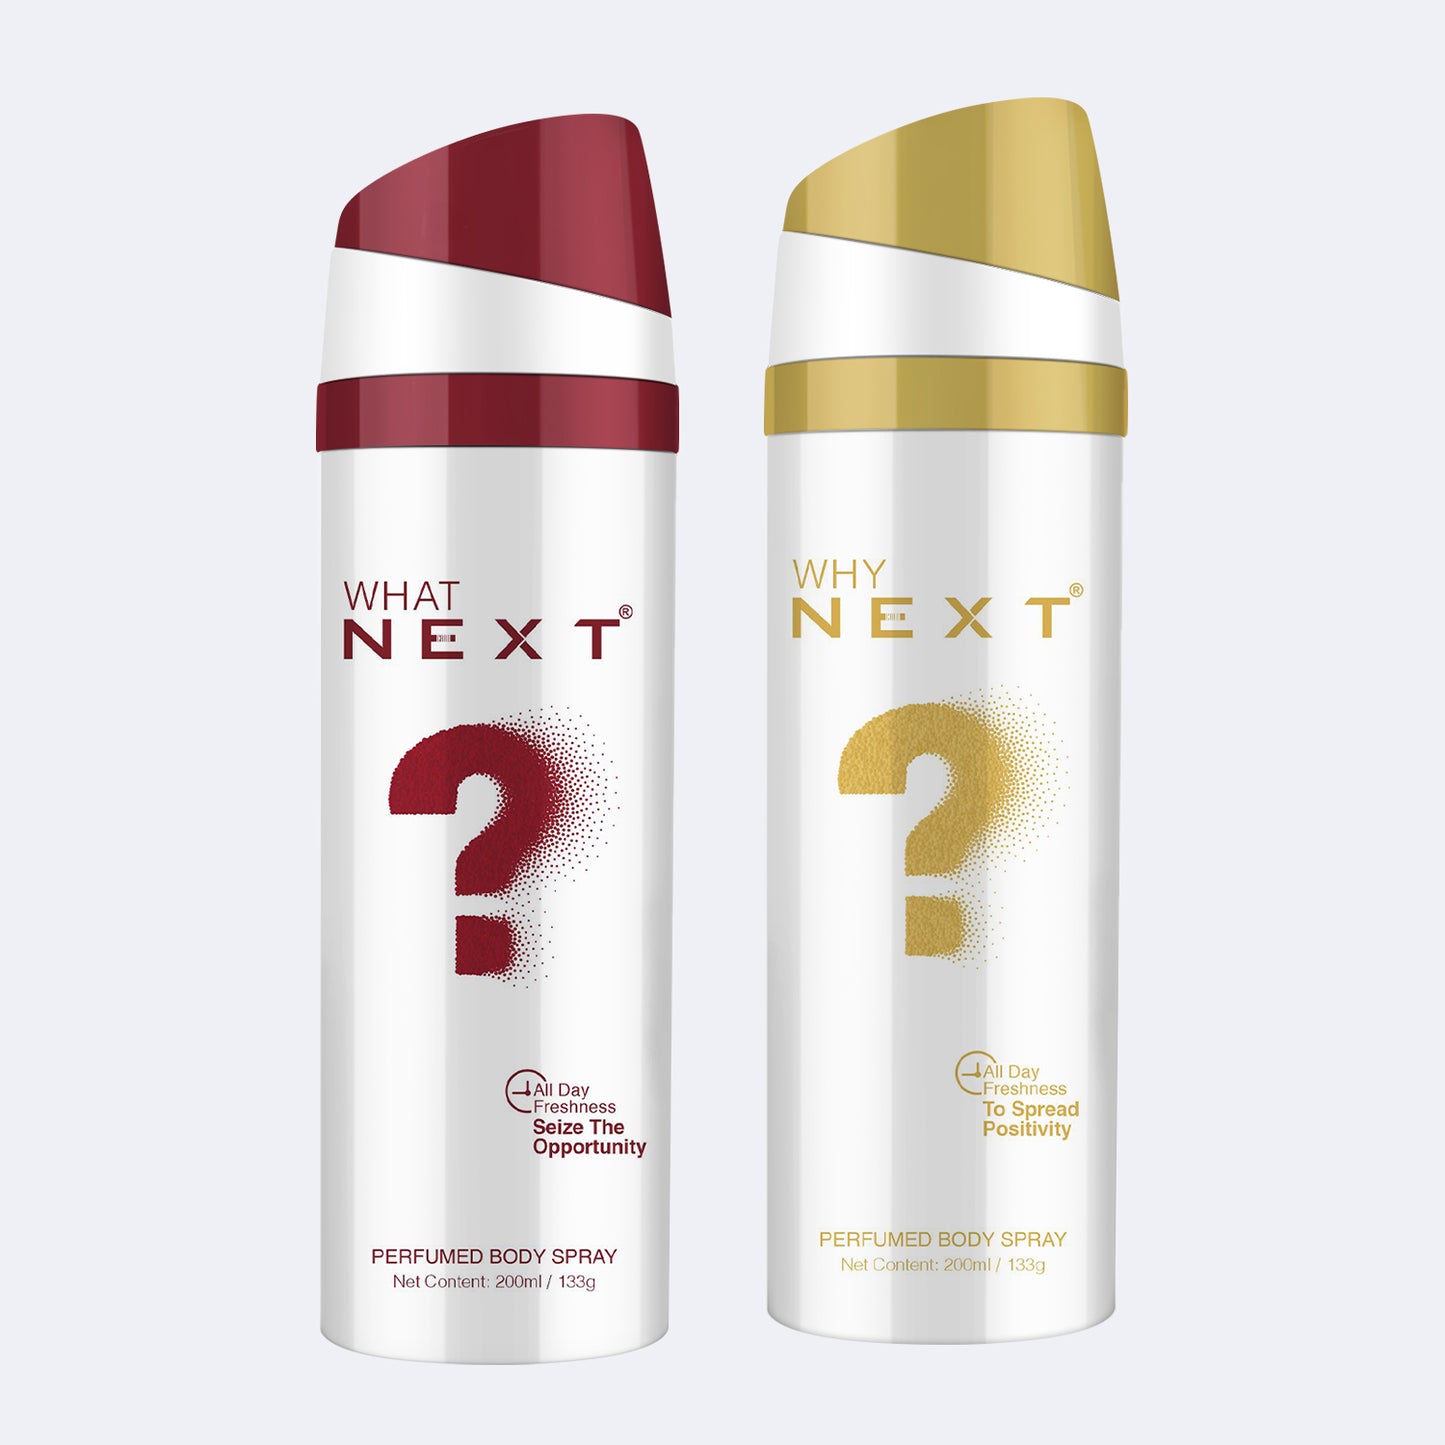 Next What? & Why? Long lasting perfumed body spray for men & women – 200ml each ( New Edition )